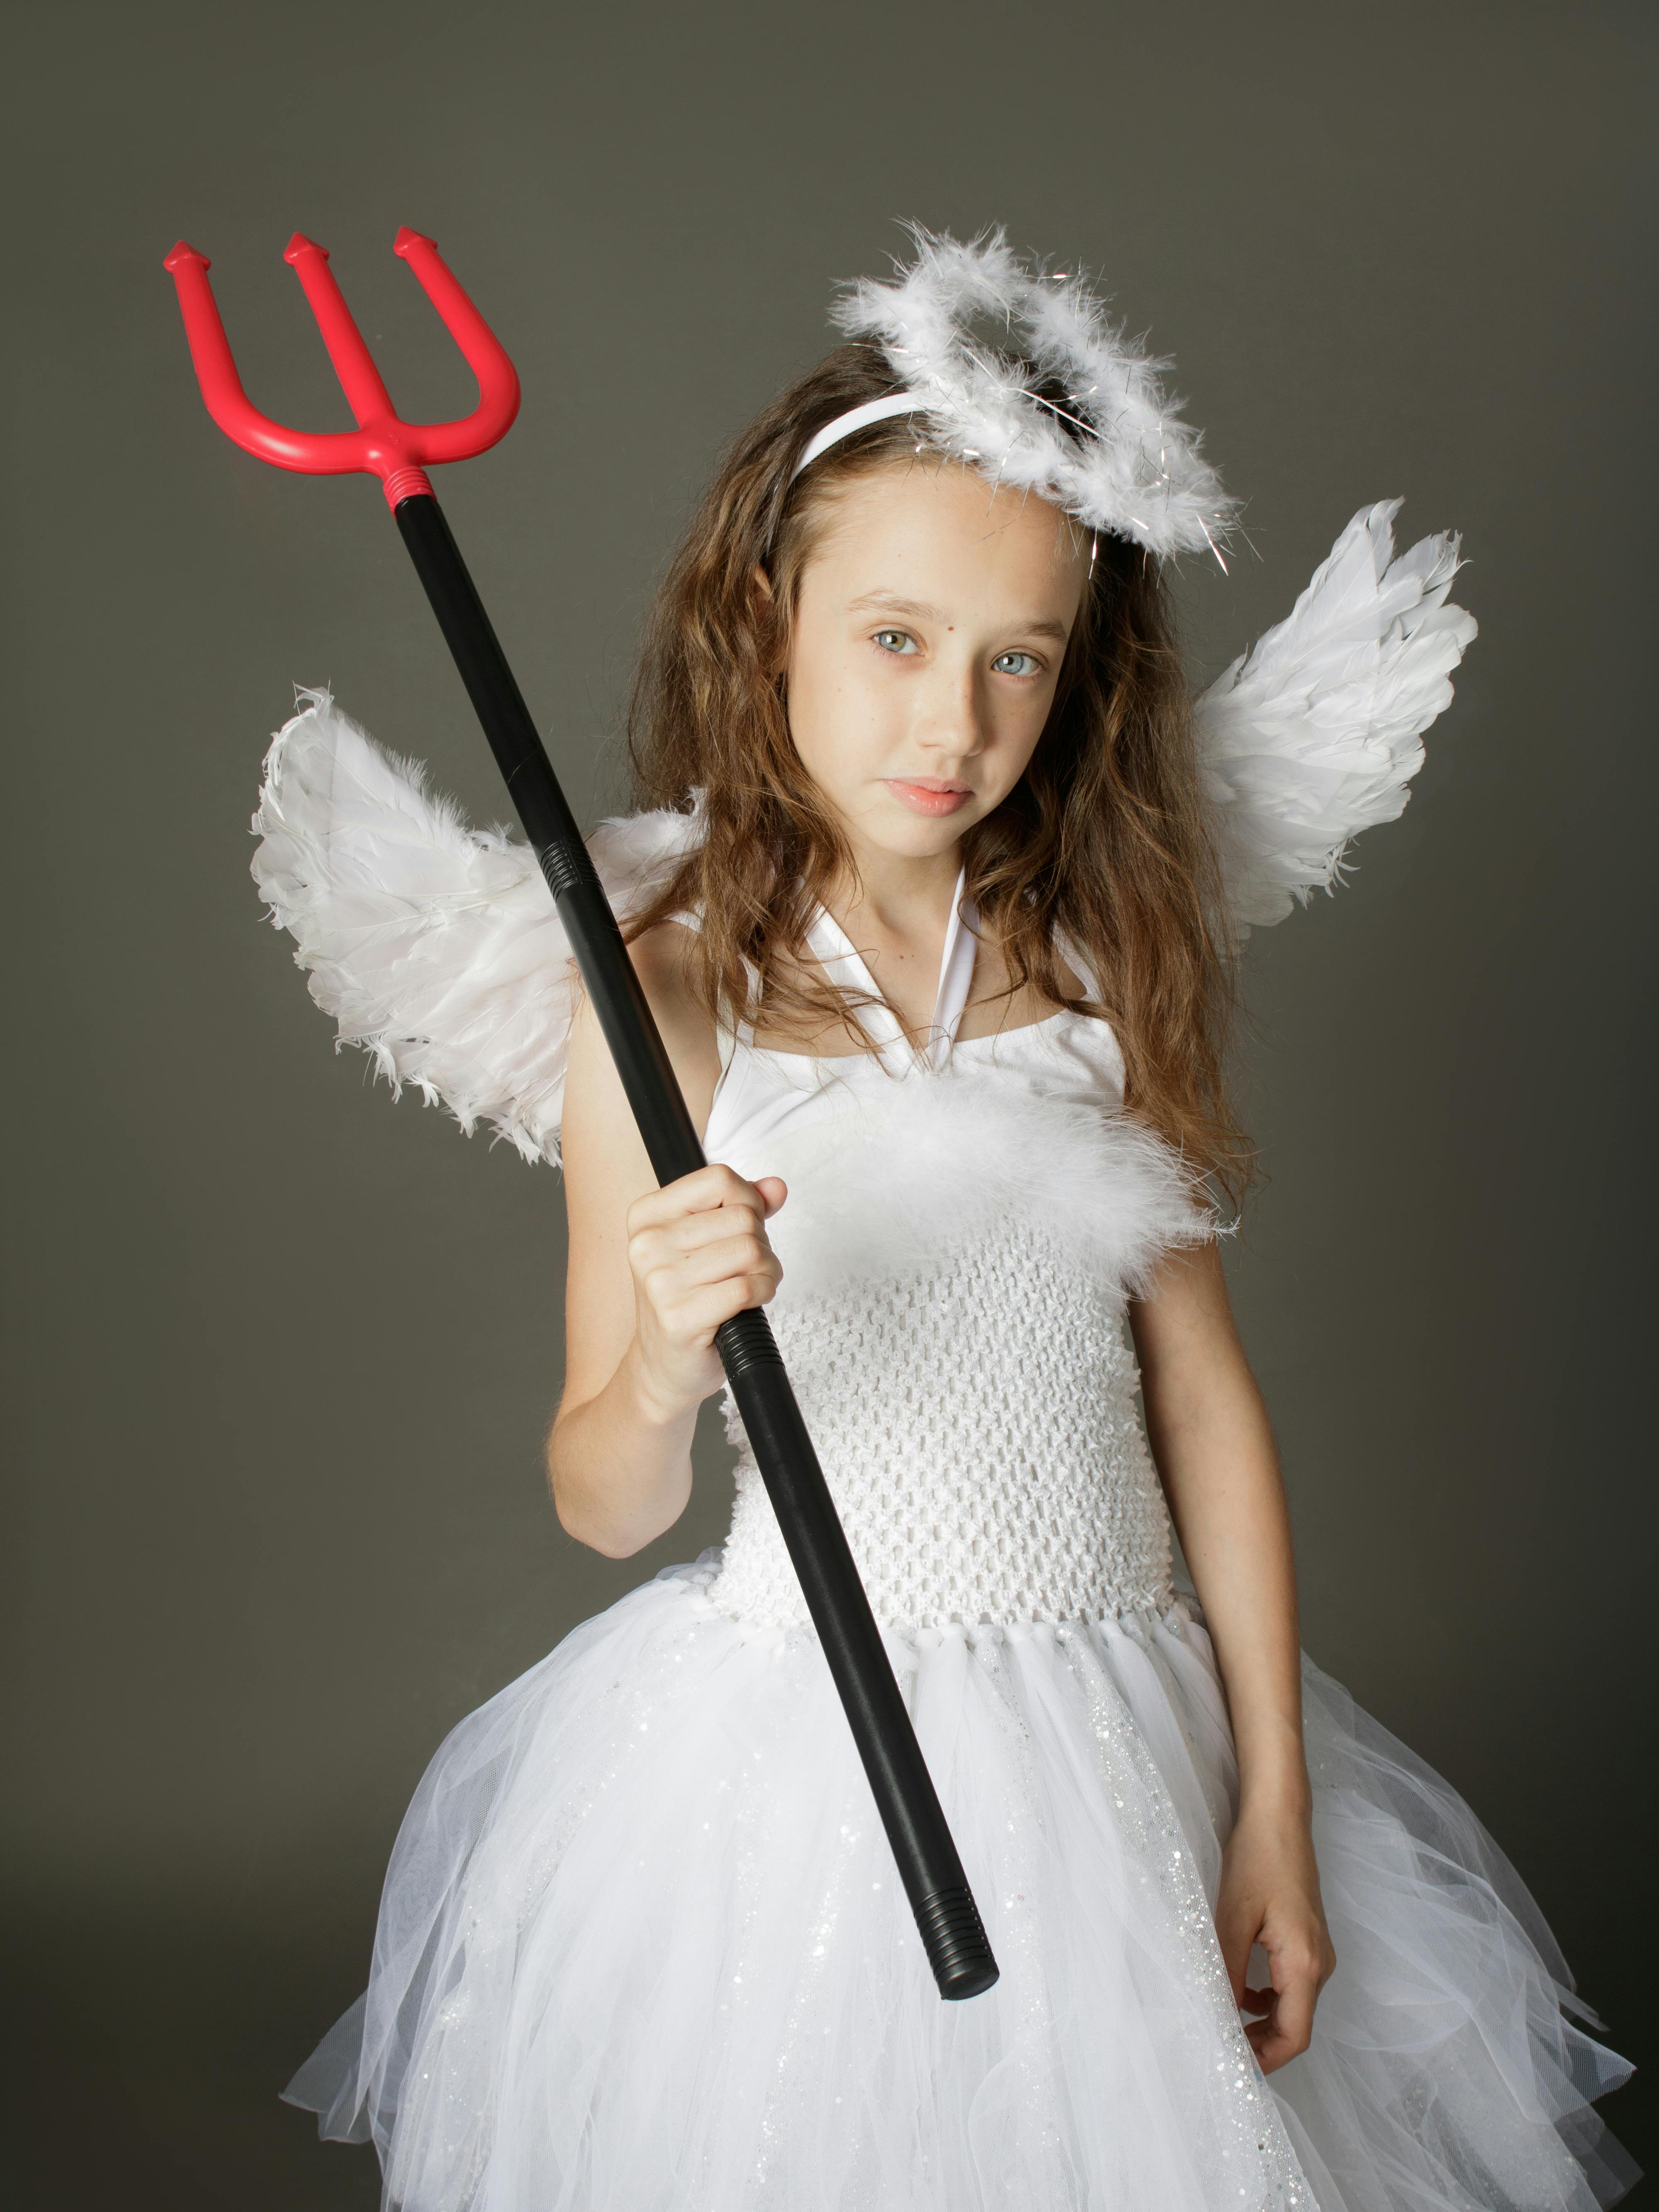 Cute Girl in Angel Costume Holding a Trident · Free Stock Photo